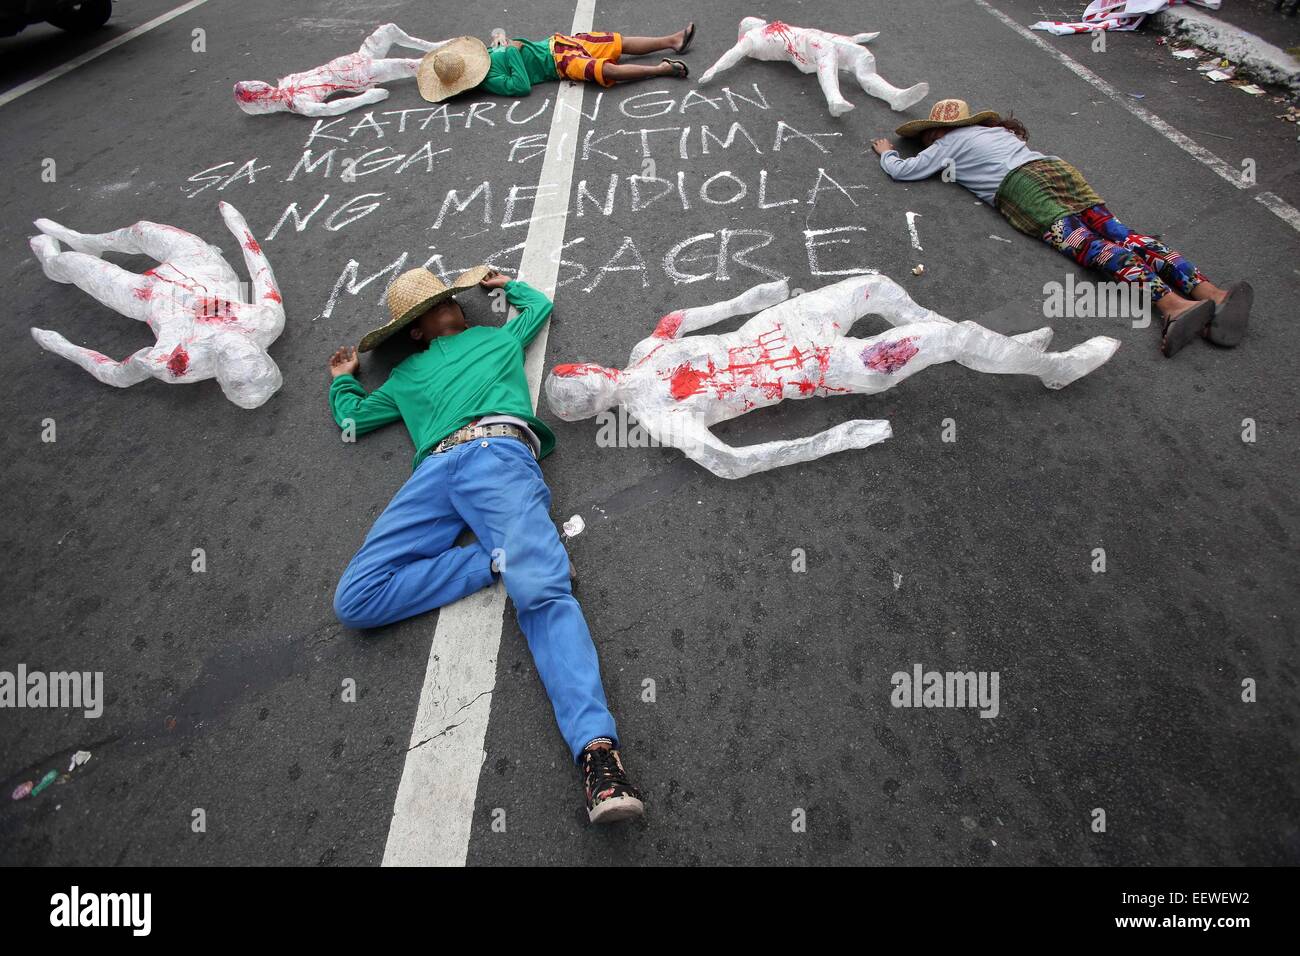 Manila, Philippines. 22nd Jan, 2015. Activists lie down on a street with human figures made up of packaging tape during a protest rally commemorating the Mendiola Massacre anniversary near the Malacanan Palace in Manila, the Philippines, Jan. 22, 2015. The farmers called for land reform and demanded justice for the 13 farmers who were killed 28 years ago. © Rouelle Umali/Xinhua/Alamy Live News Stock Photo